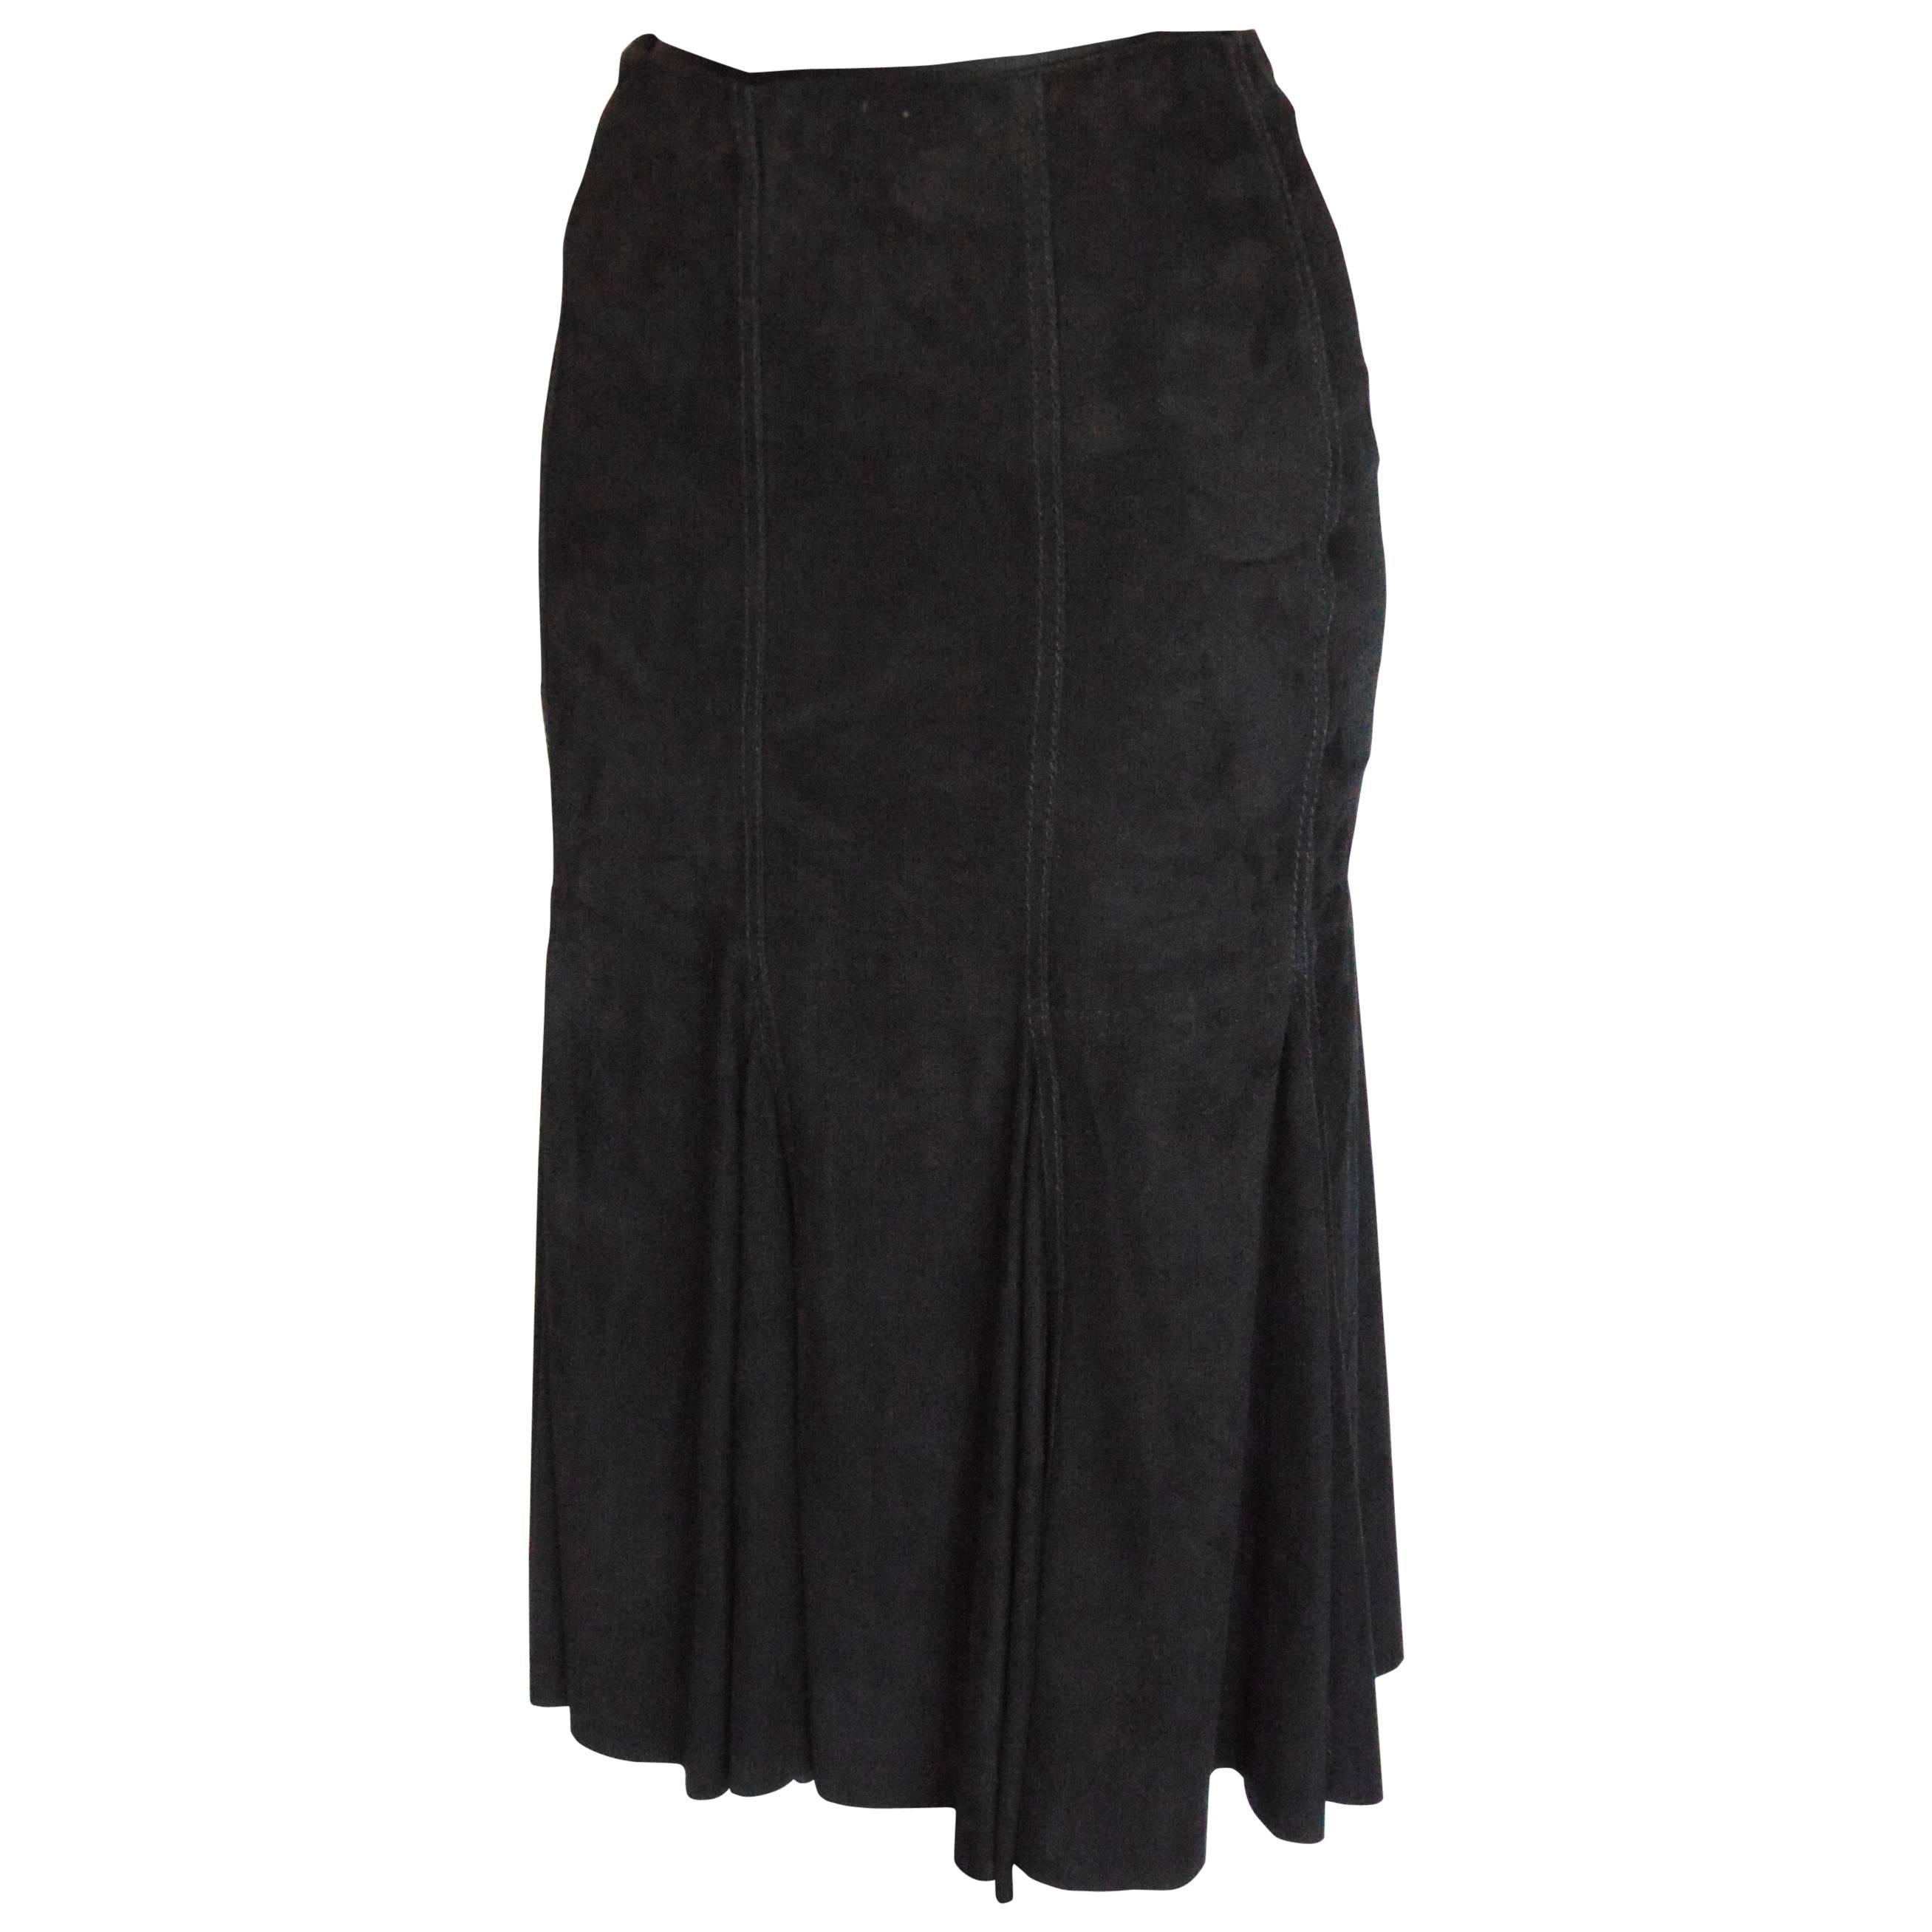 Genny Italy Supple Black Suede Leather Mermaid Skirt 1990s Size S